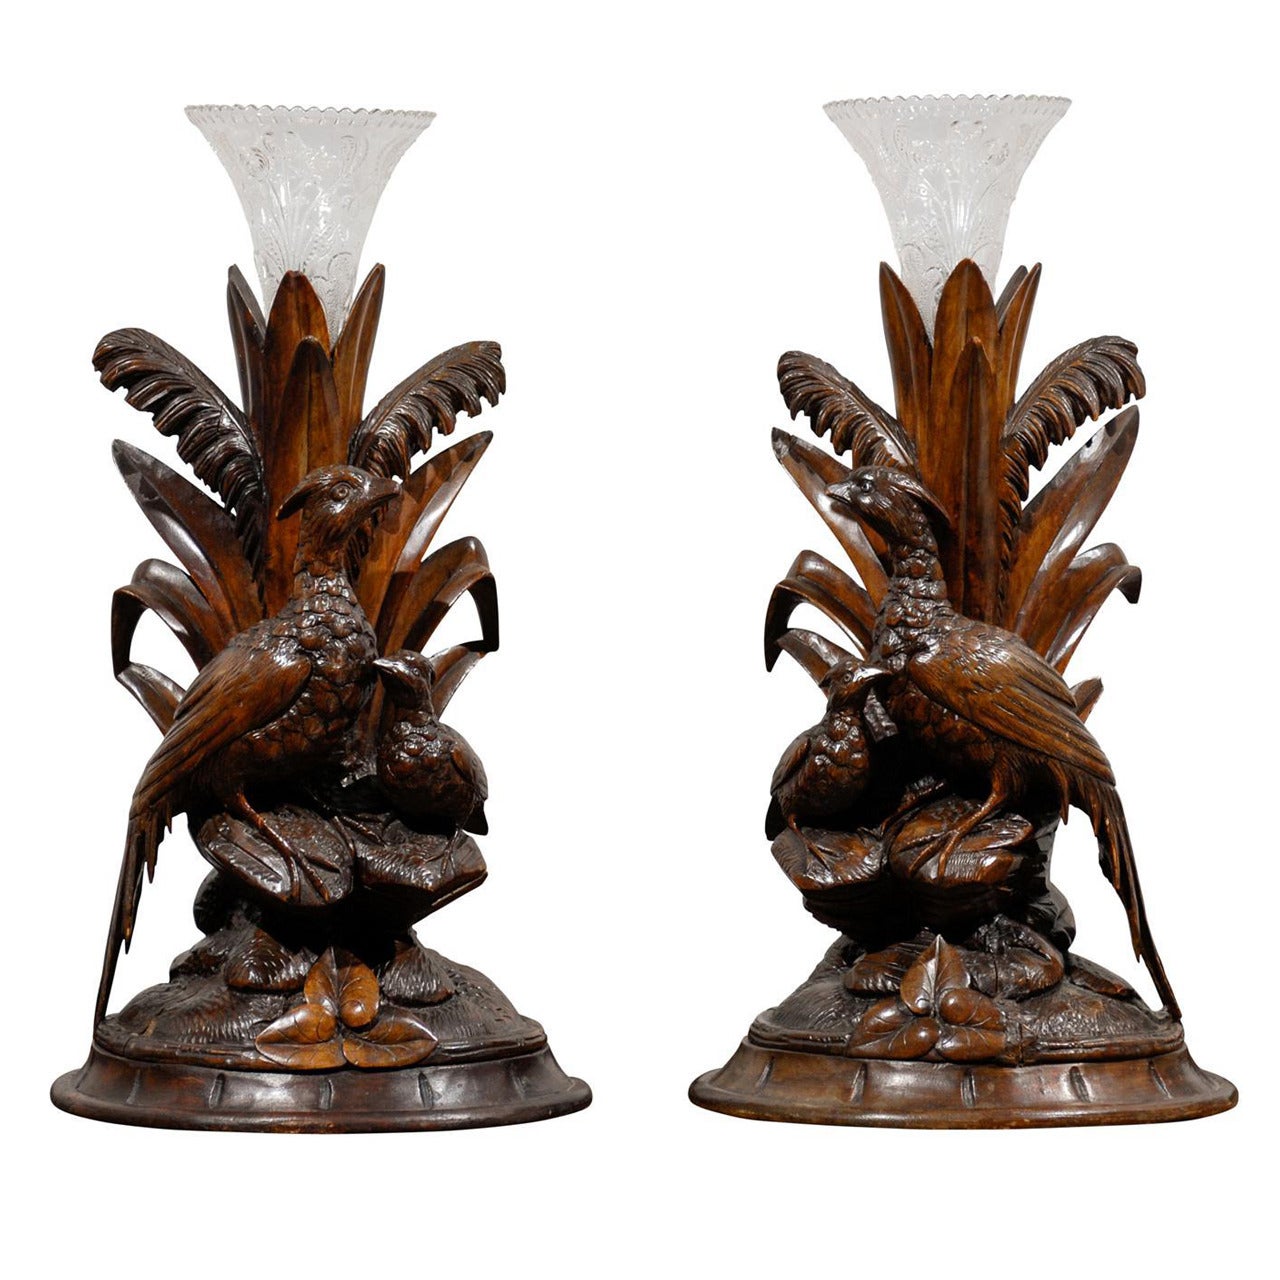 Very Rare Pair of Black Forest Epergnes or Vases, circa 1880